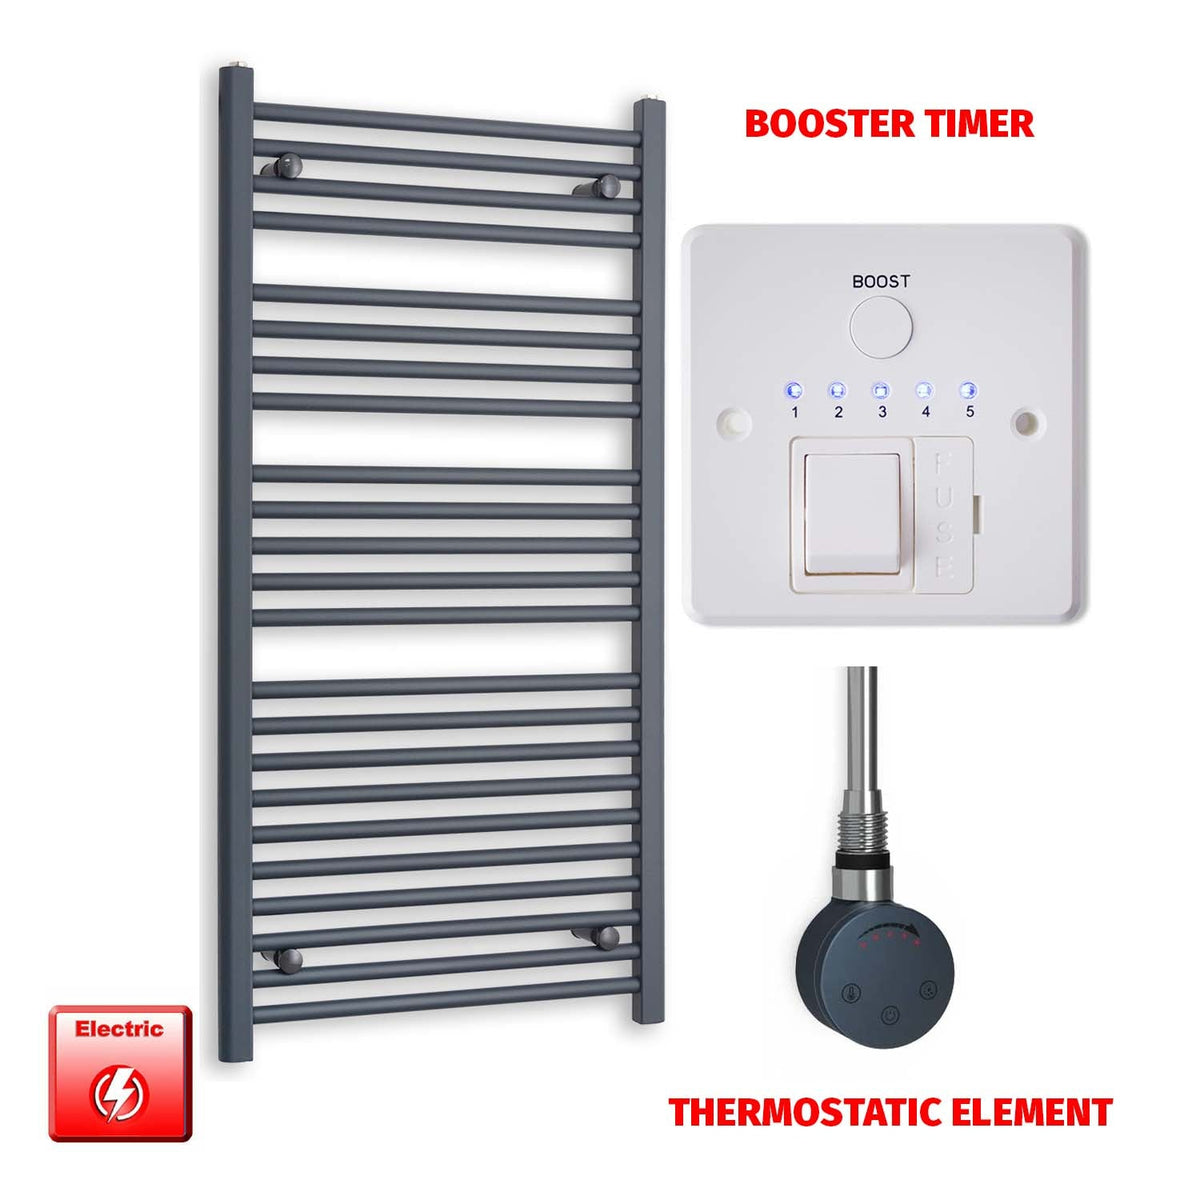 1200mm High 600mm Wide Flat Anthracite Pre-Filled Electric Heated Towel Rail Radiator HTR SMR Thermostatic element Boostertimer